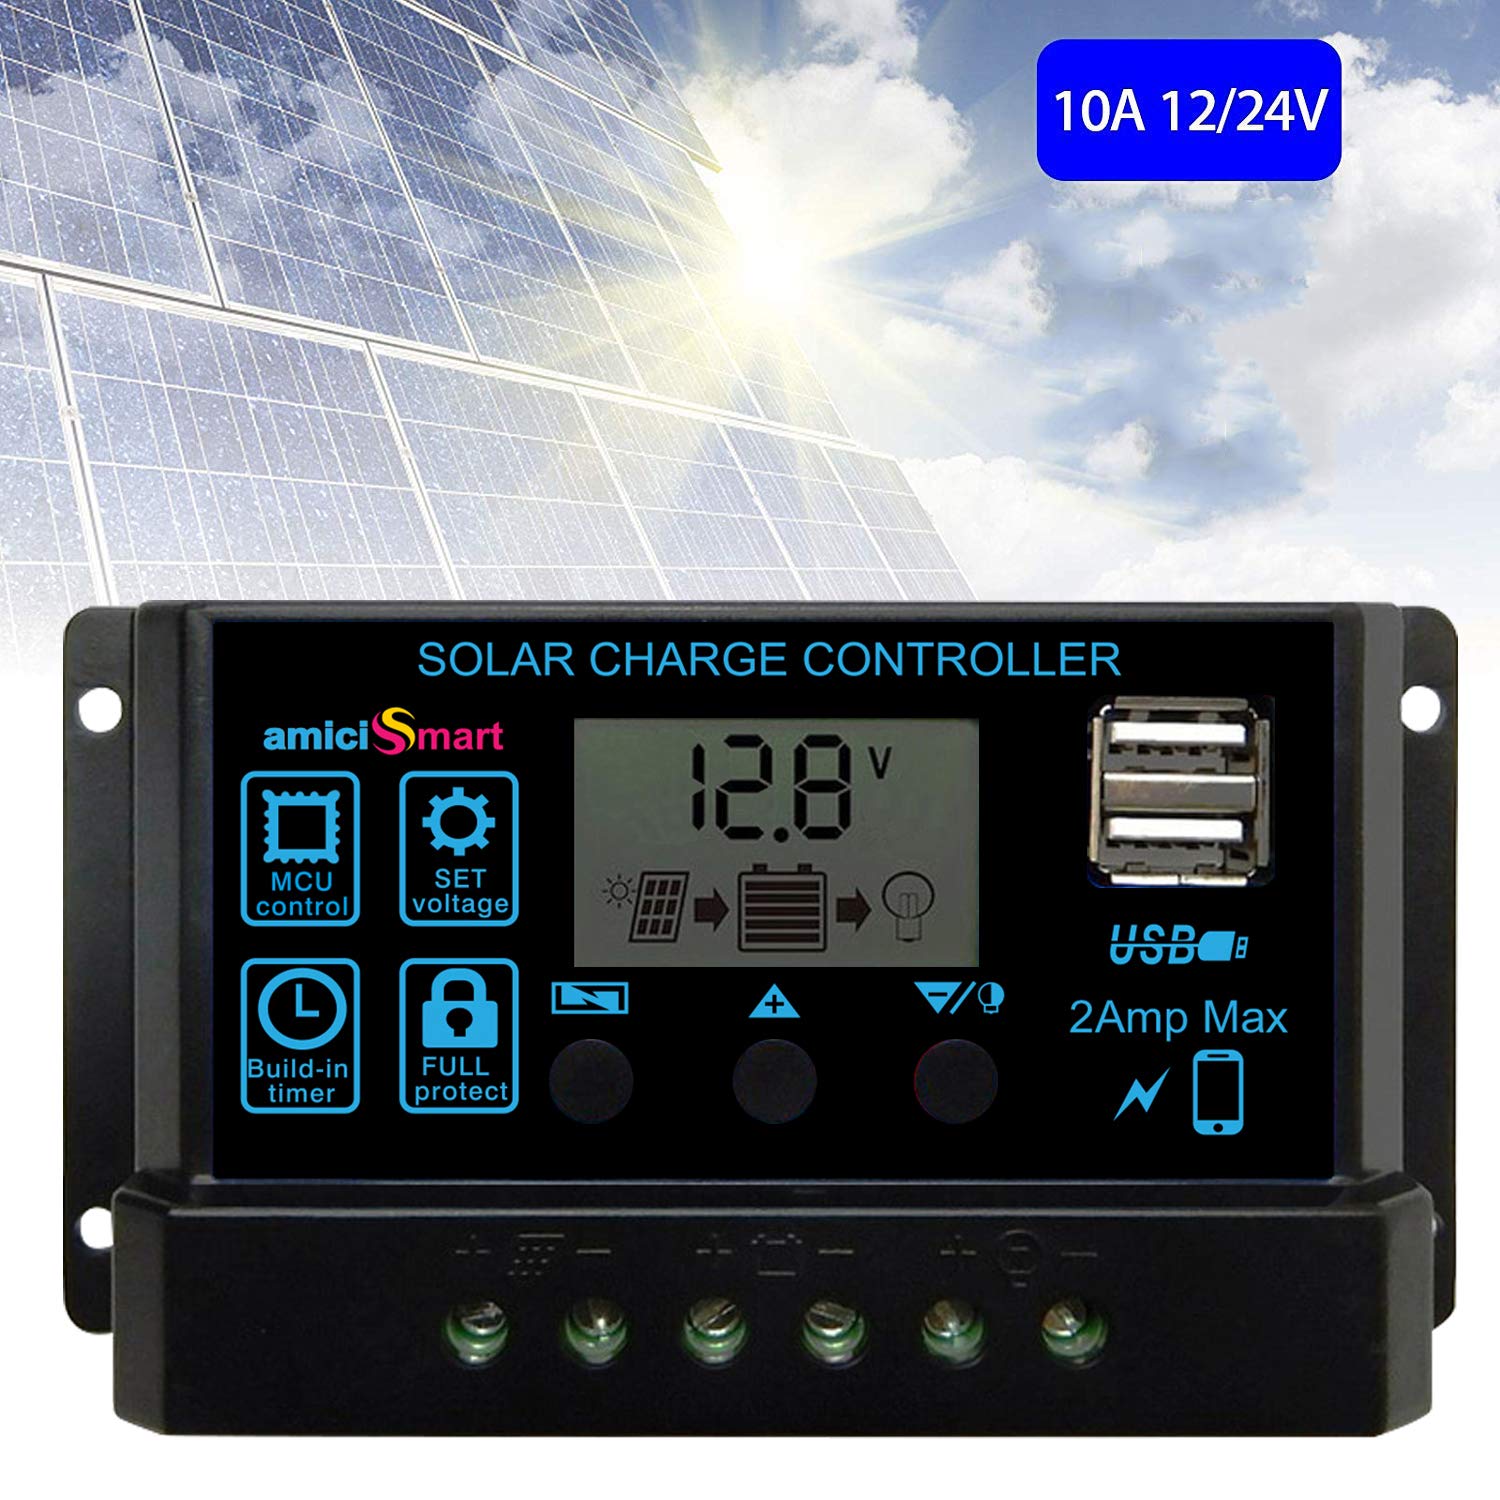 amiciSmart Solar Charger Controller 10A/20A/30A Solar Panel Battery Intelligent Regulator LCD Display with USB Port 12V/24V